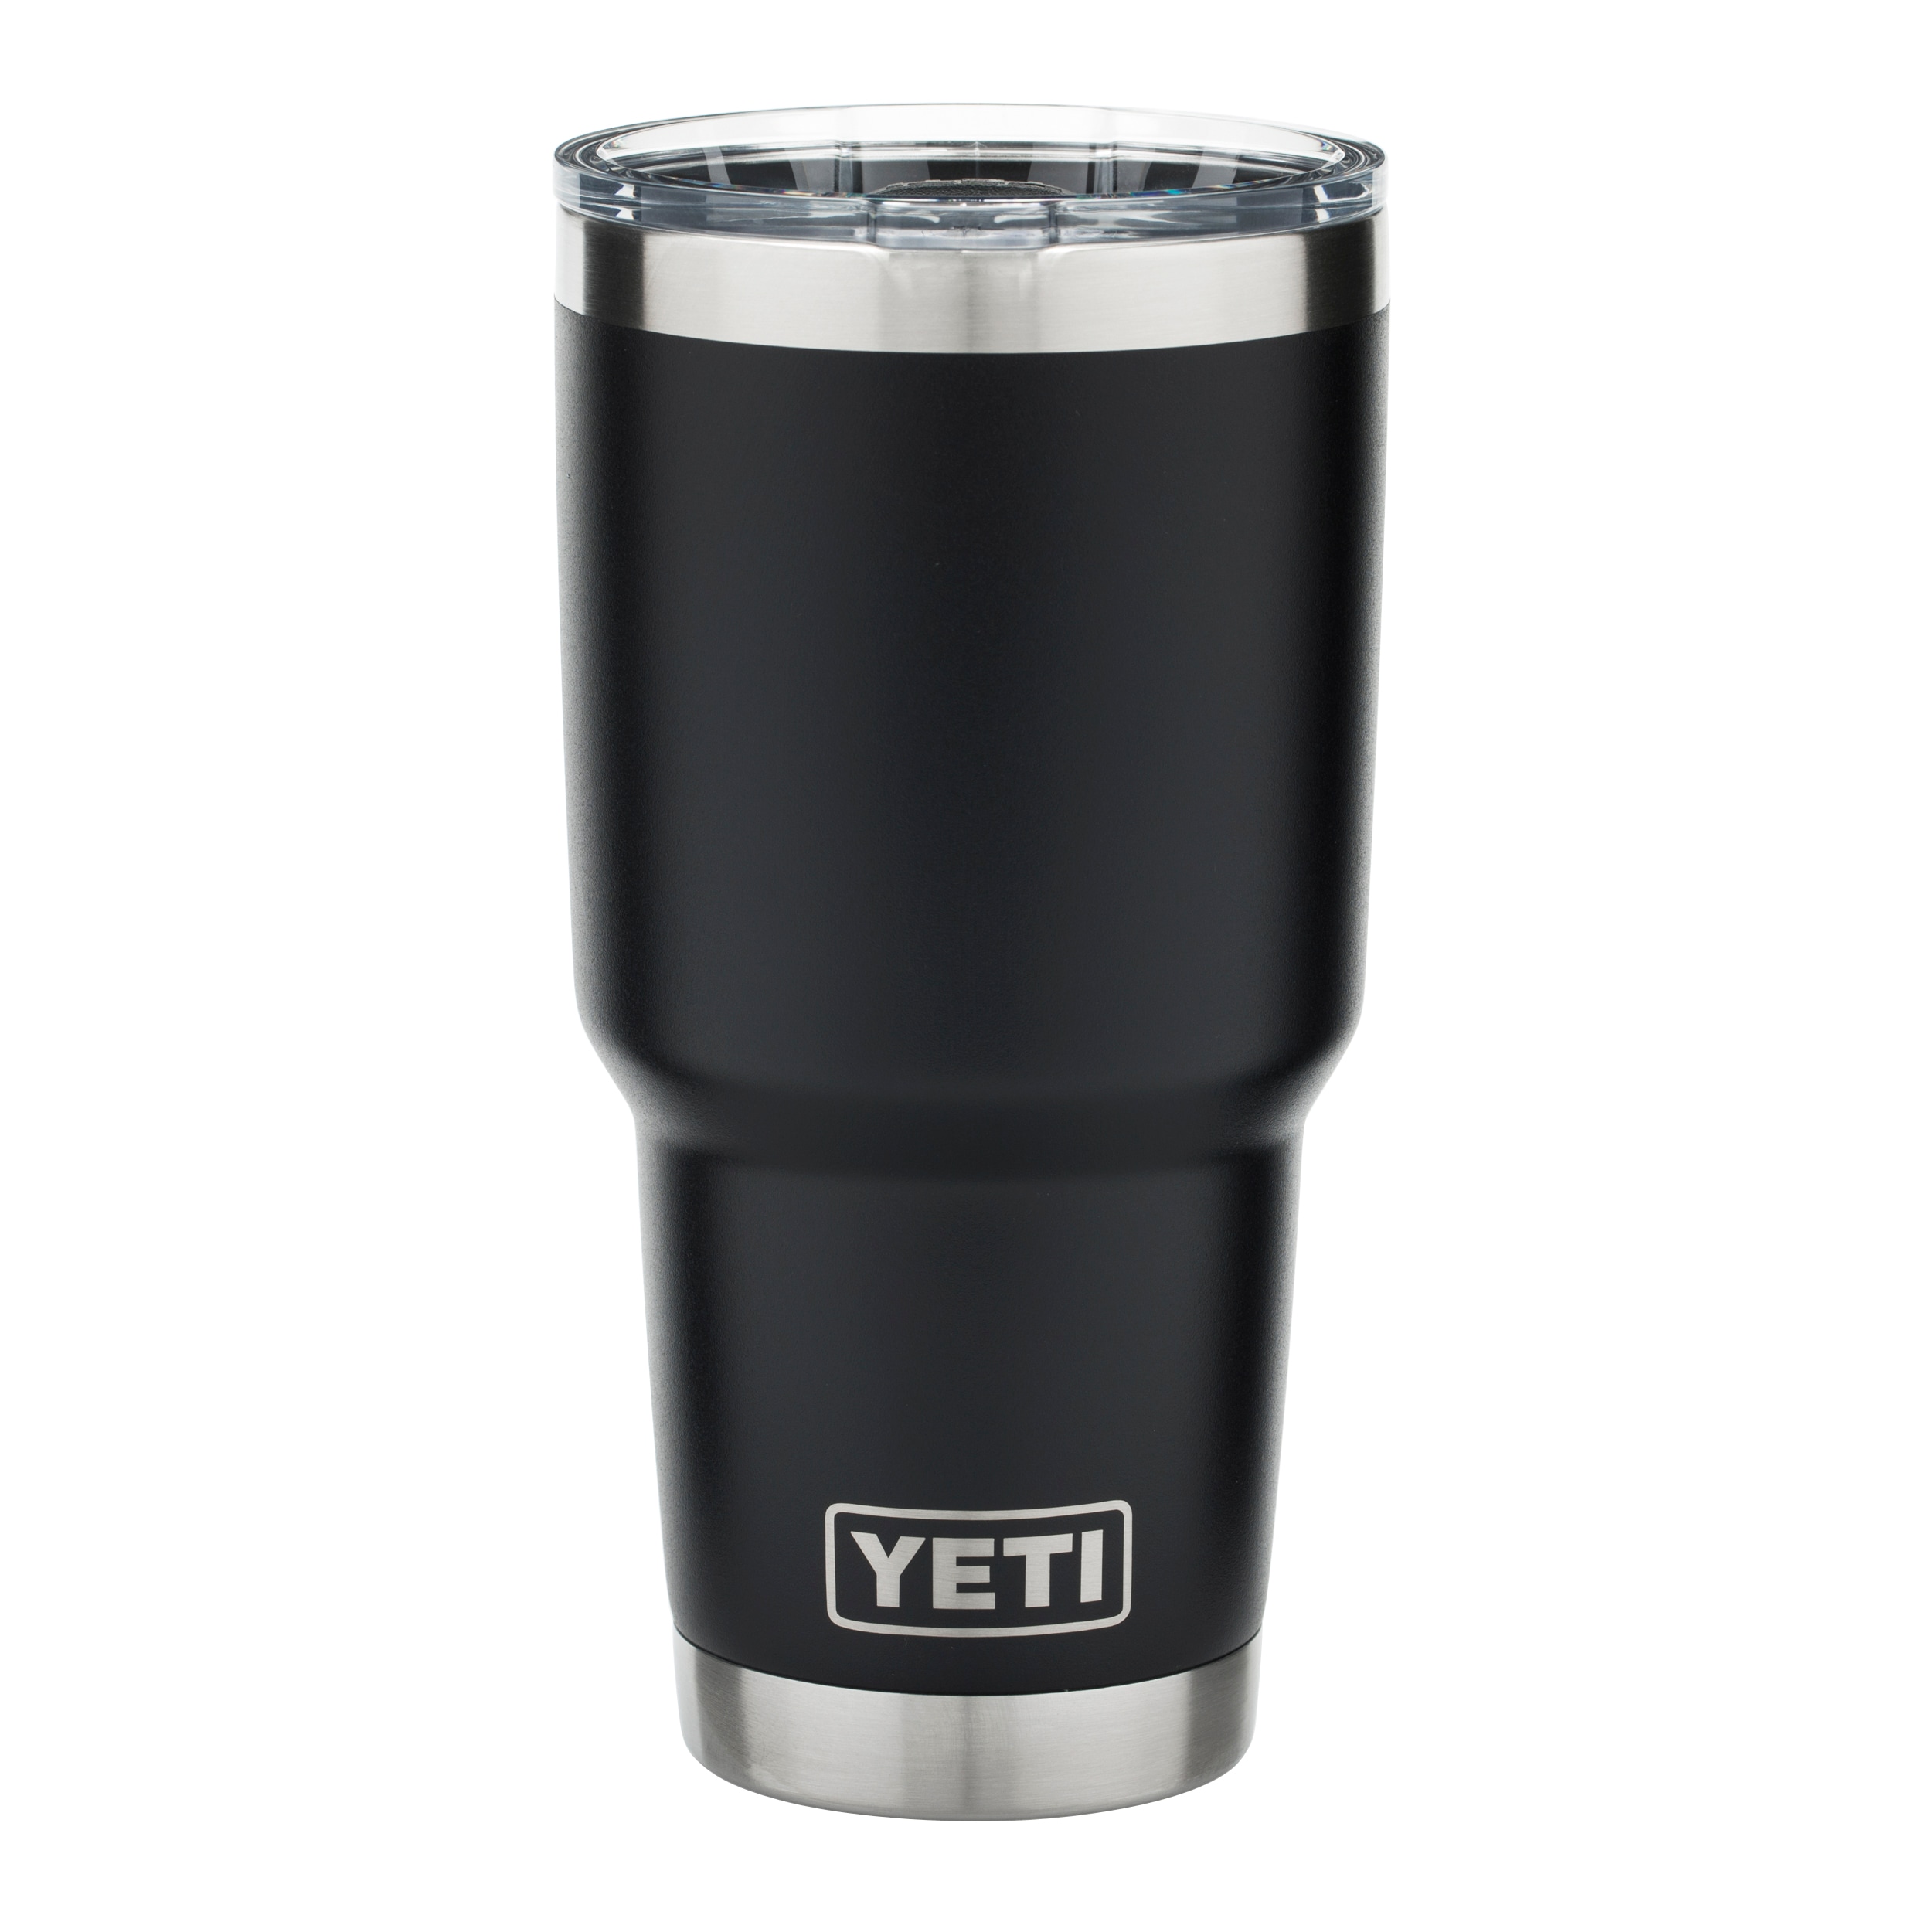 32 best YETI gifts to shop for Christmas: Coolers, tumblers, more